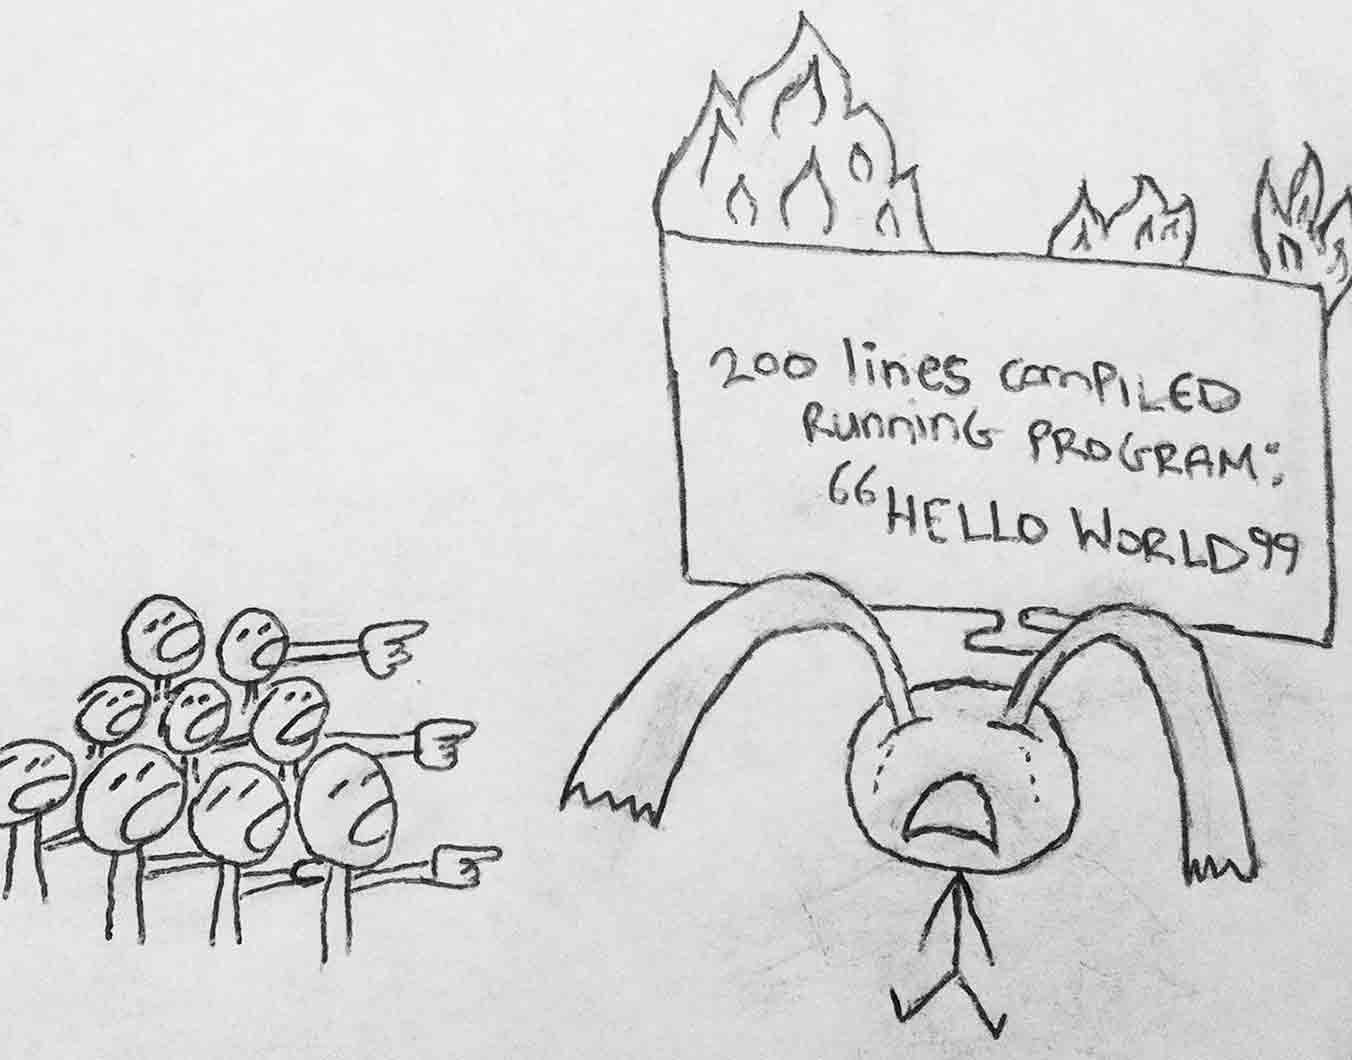 The second panel from this comic strip. Our hero cries while a crowd point and laugh as his hello world program goes up in flames behind him.